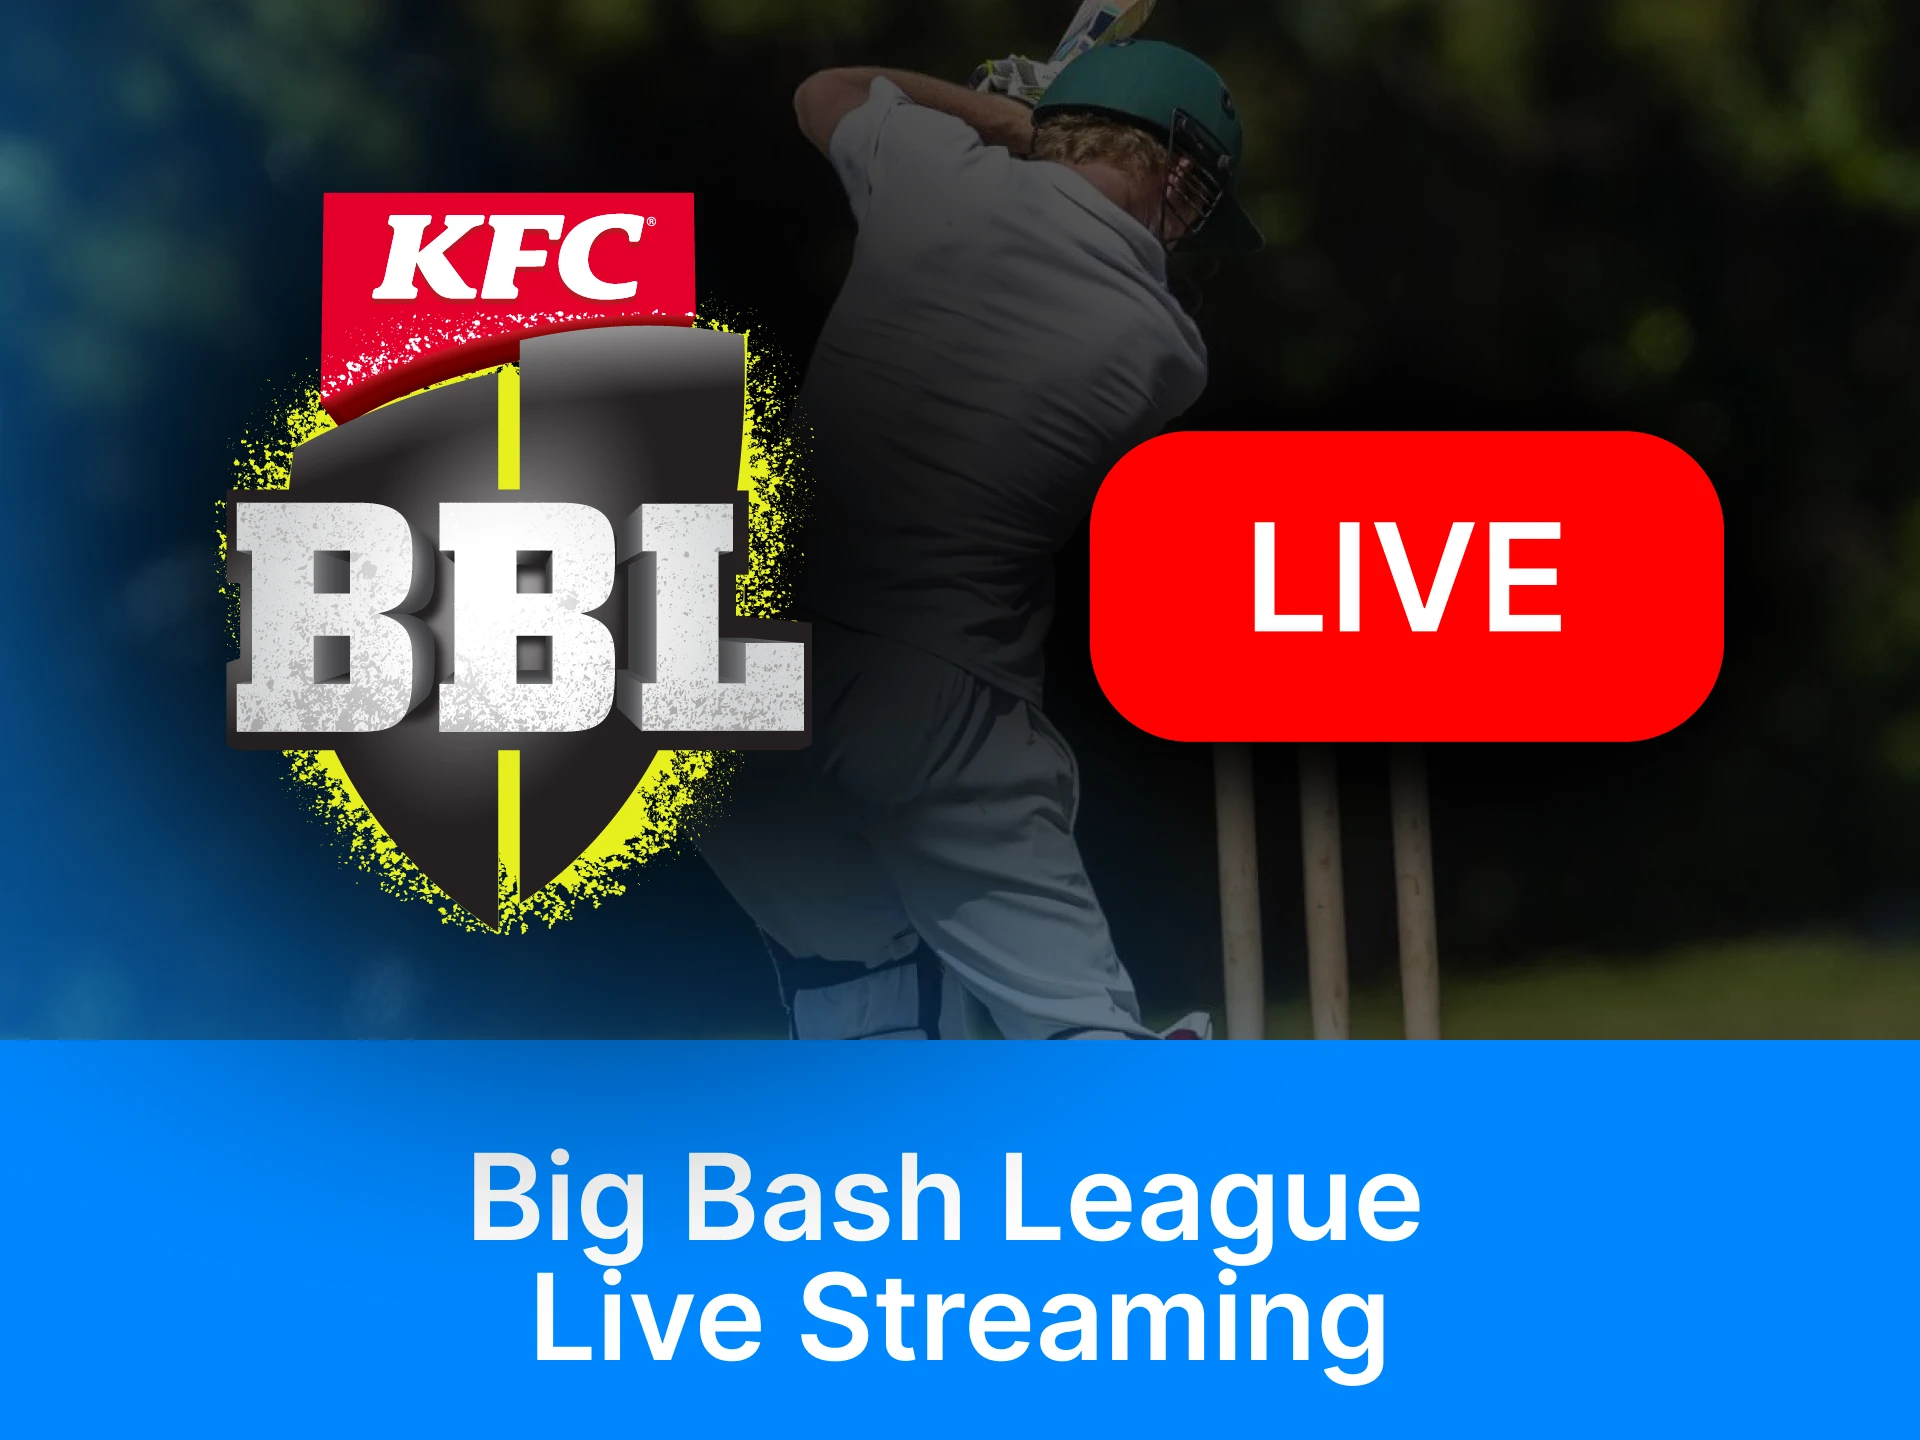 You can follow live matches of BBL online.